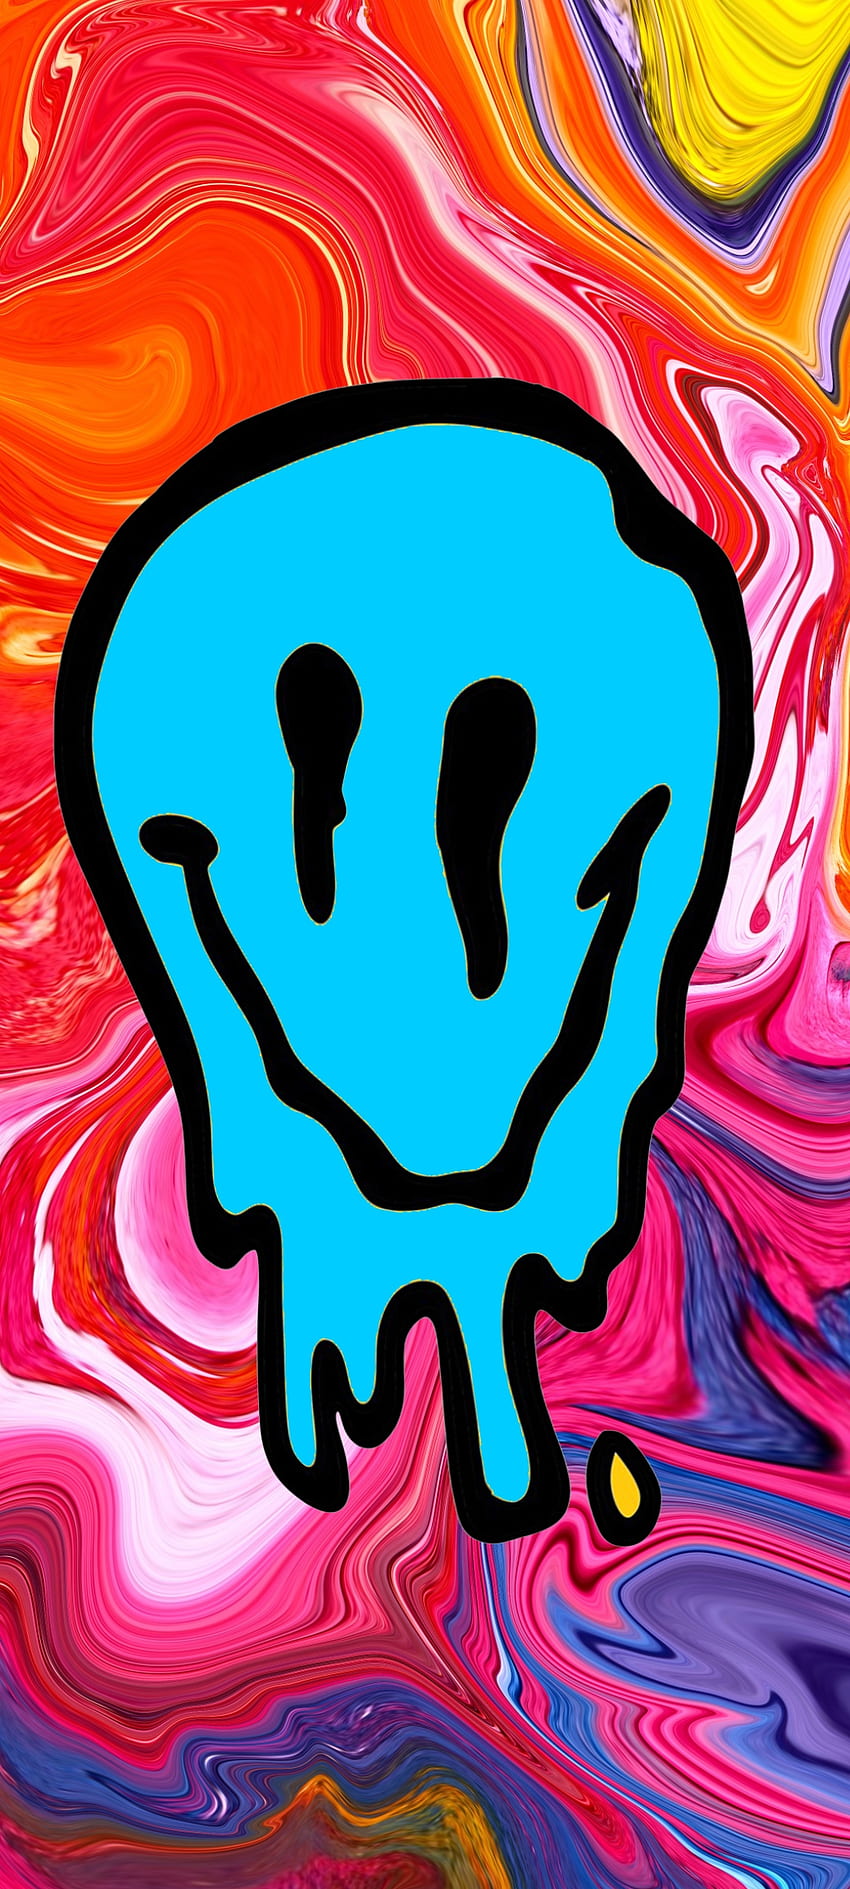 Blue melting smiley, orange, psychedelic, red, art, trippy, paint, abstract HD phone wallpaper